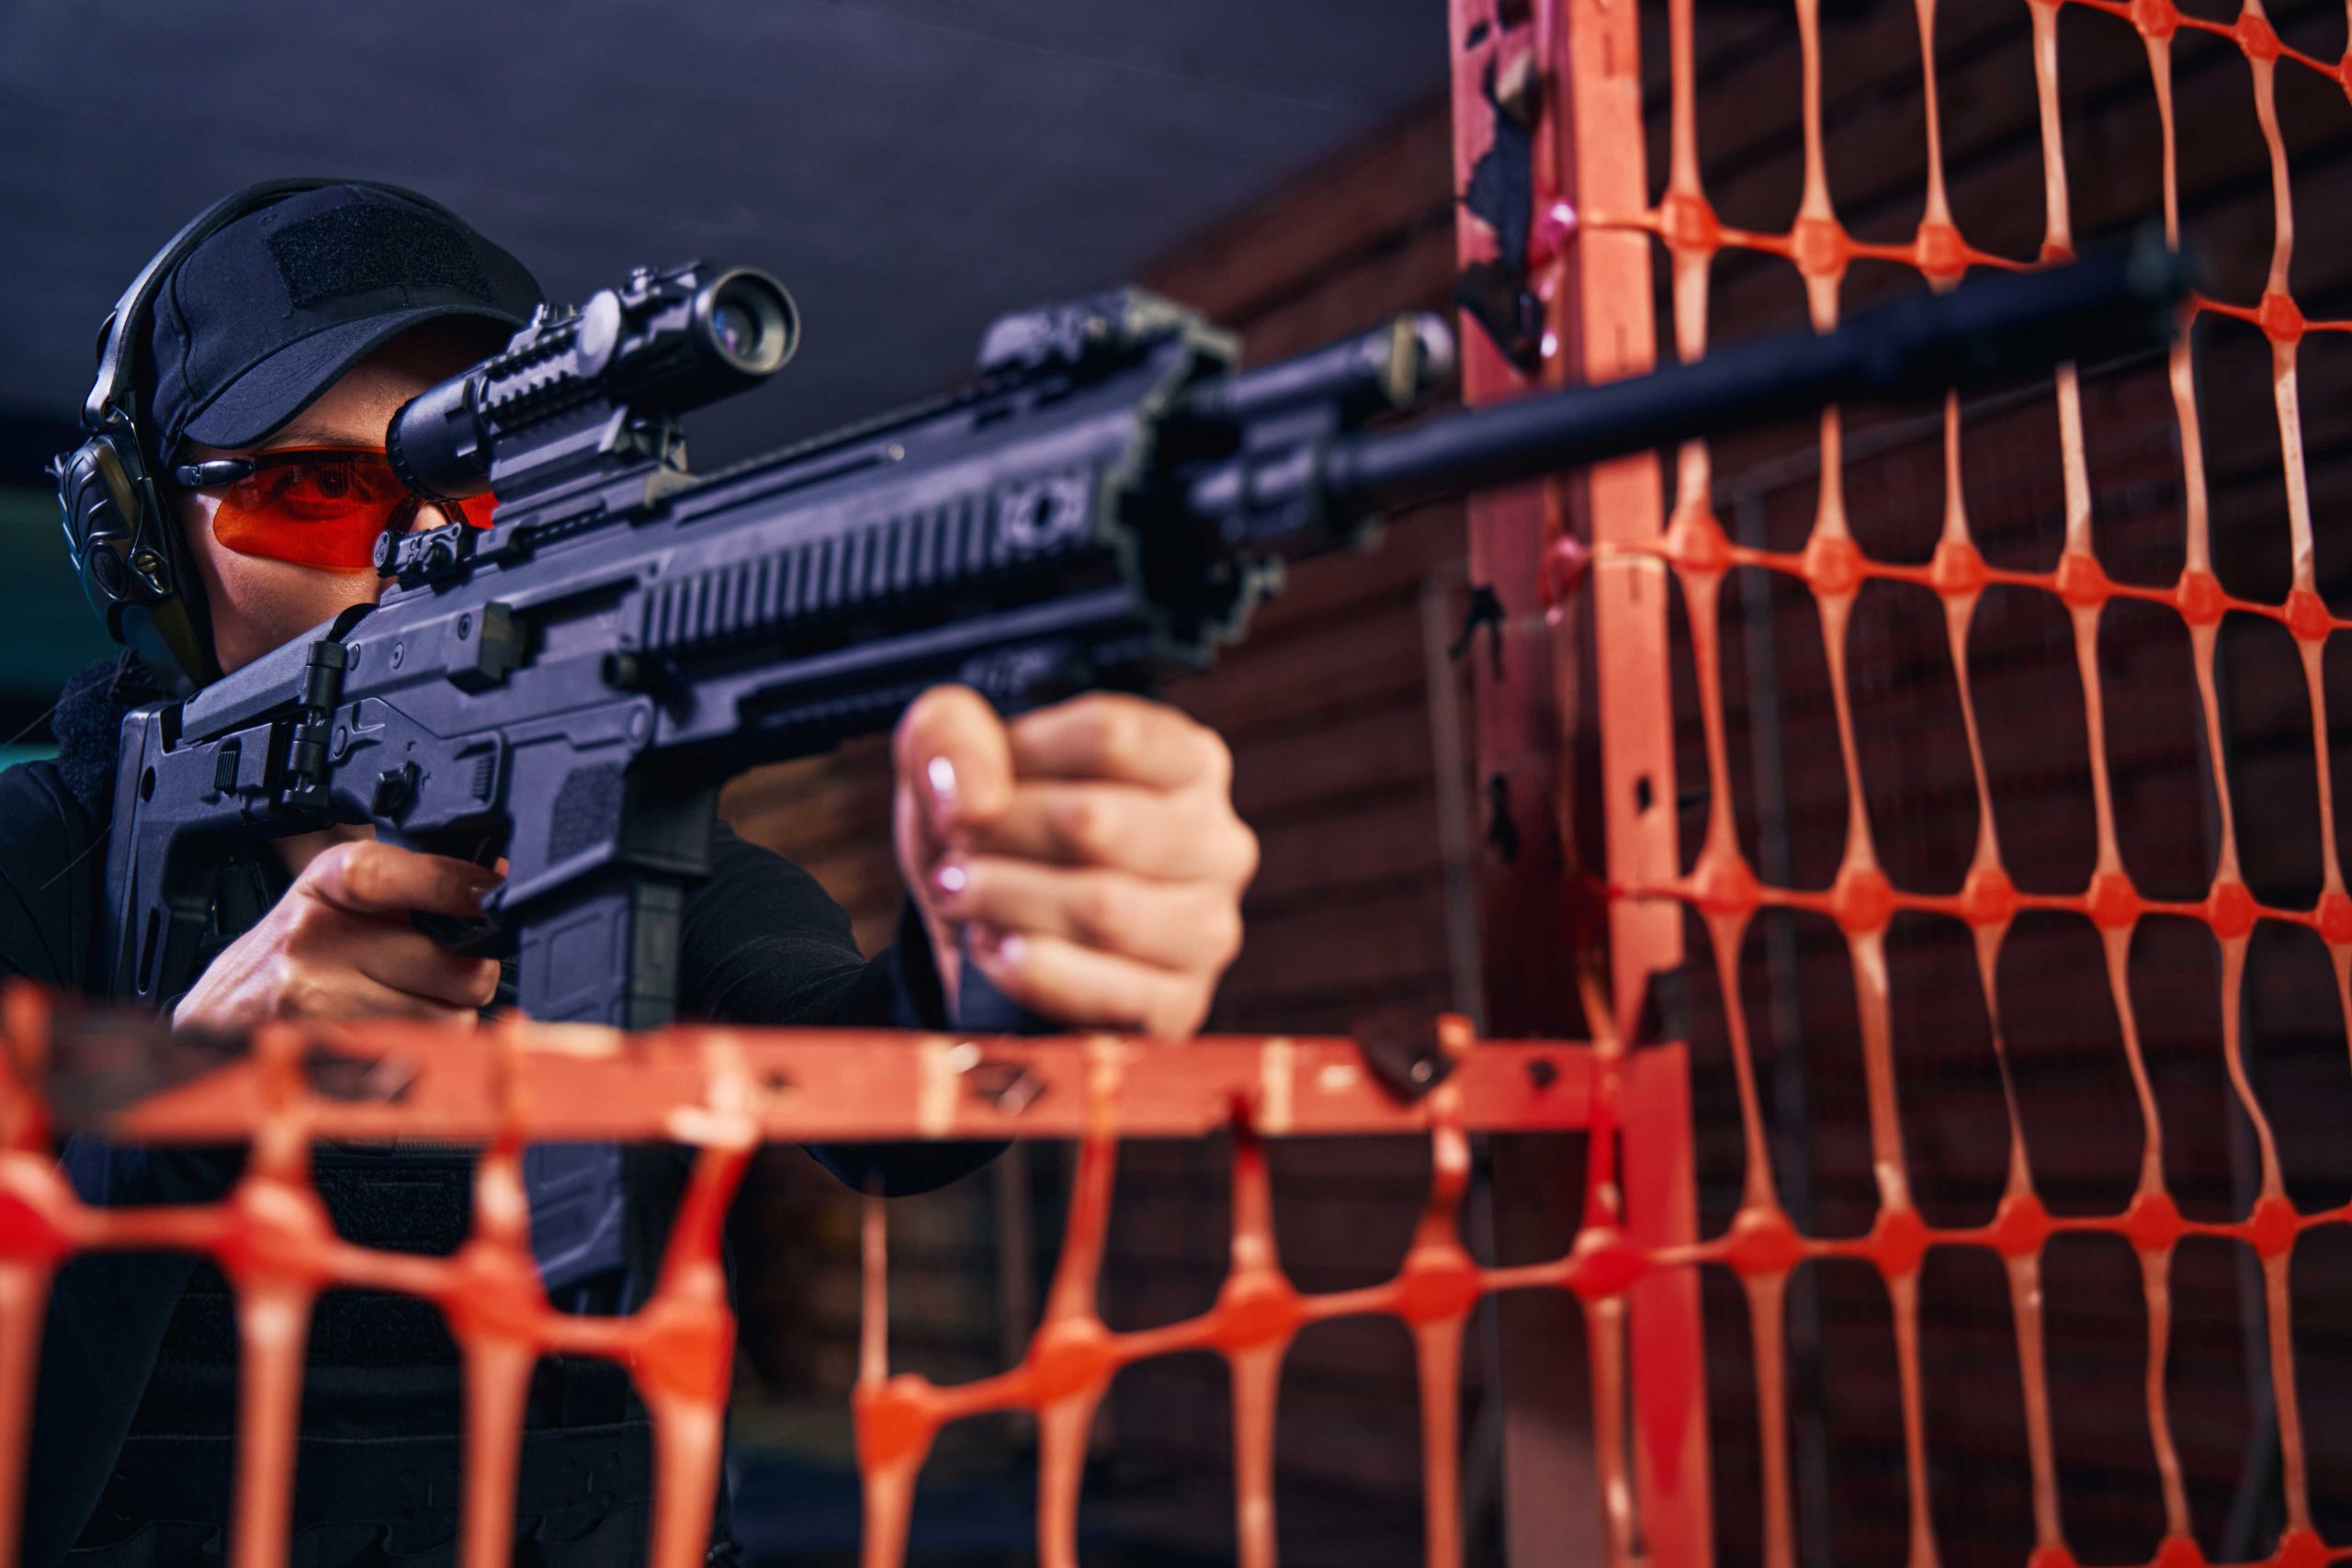 How to Own and Operate a Commercial Shooting Range